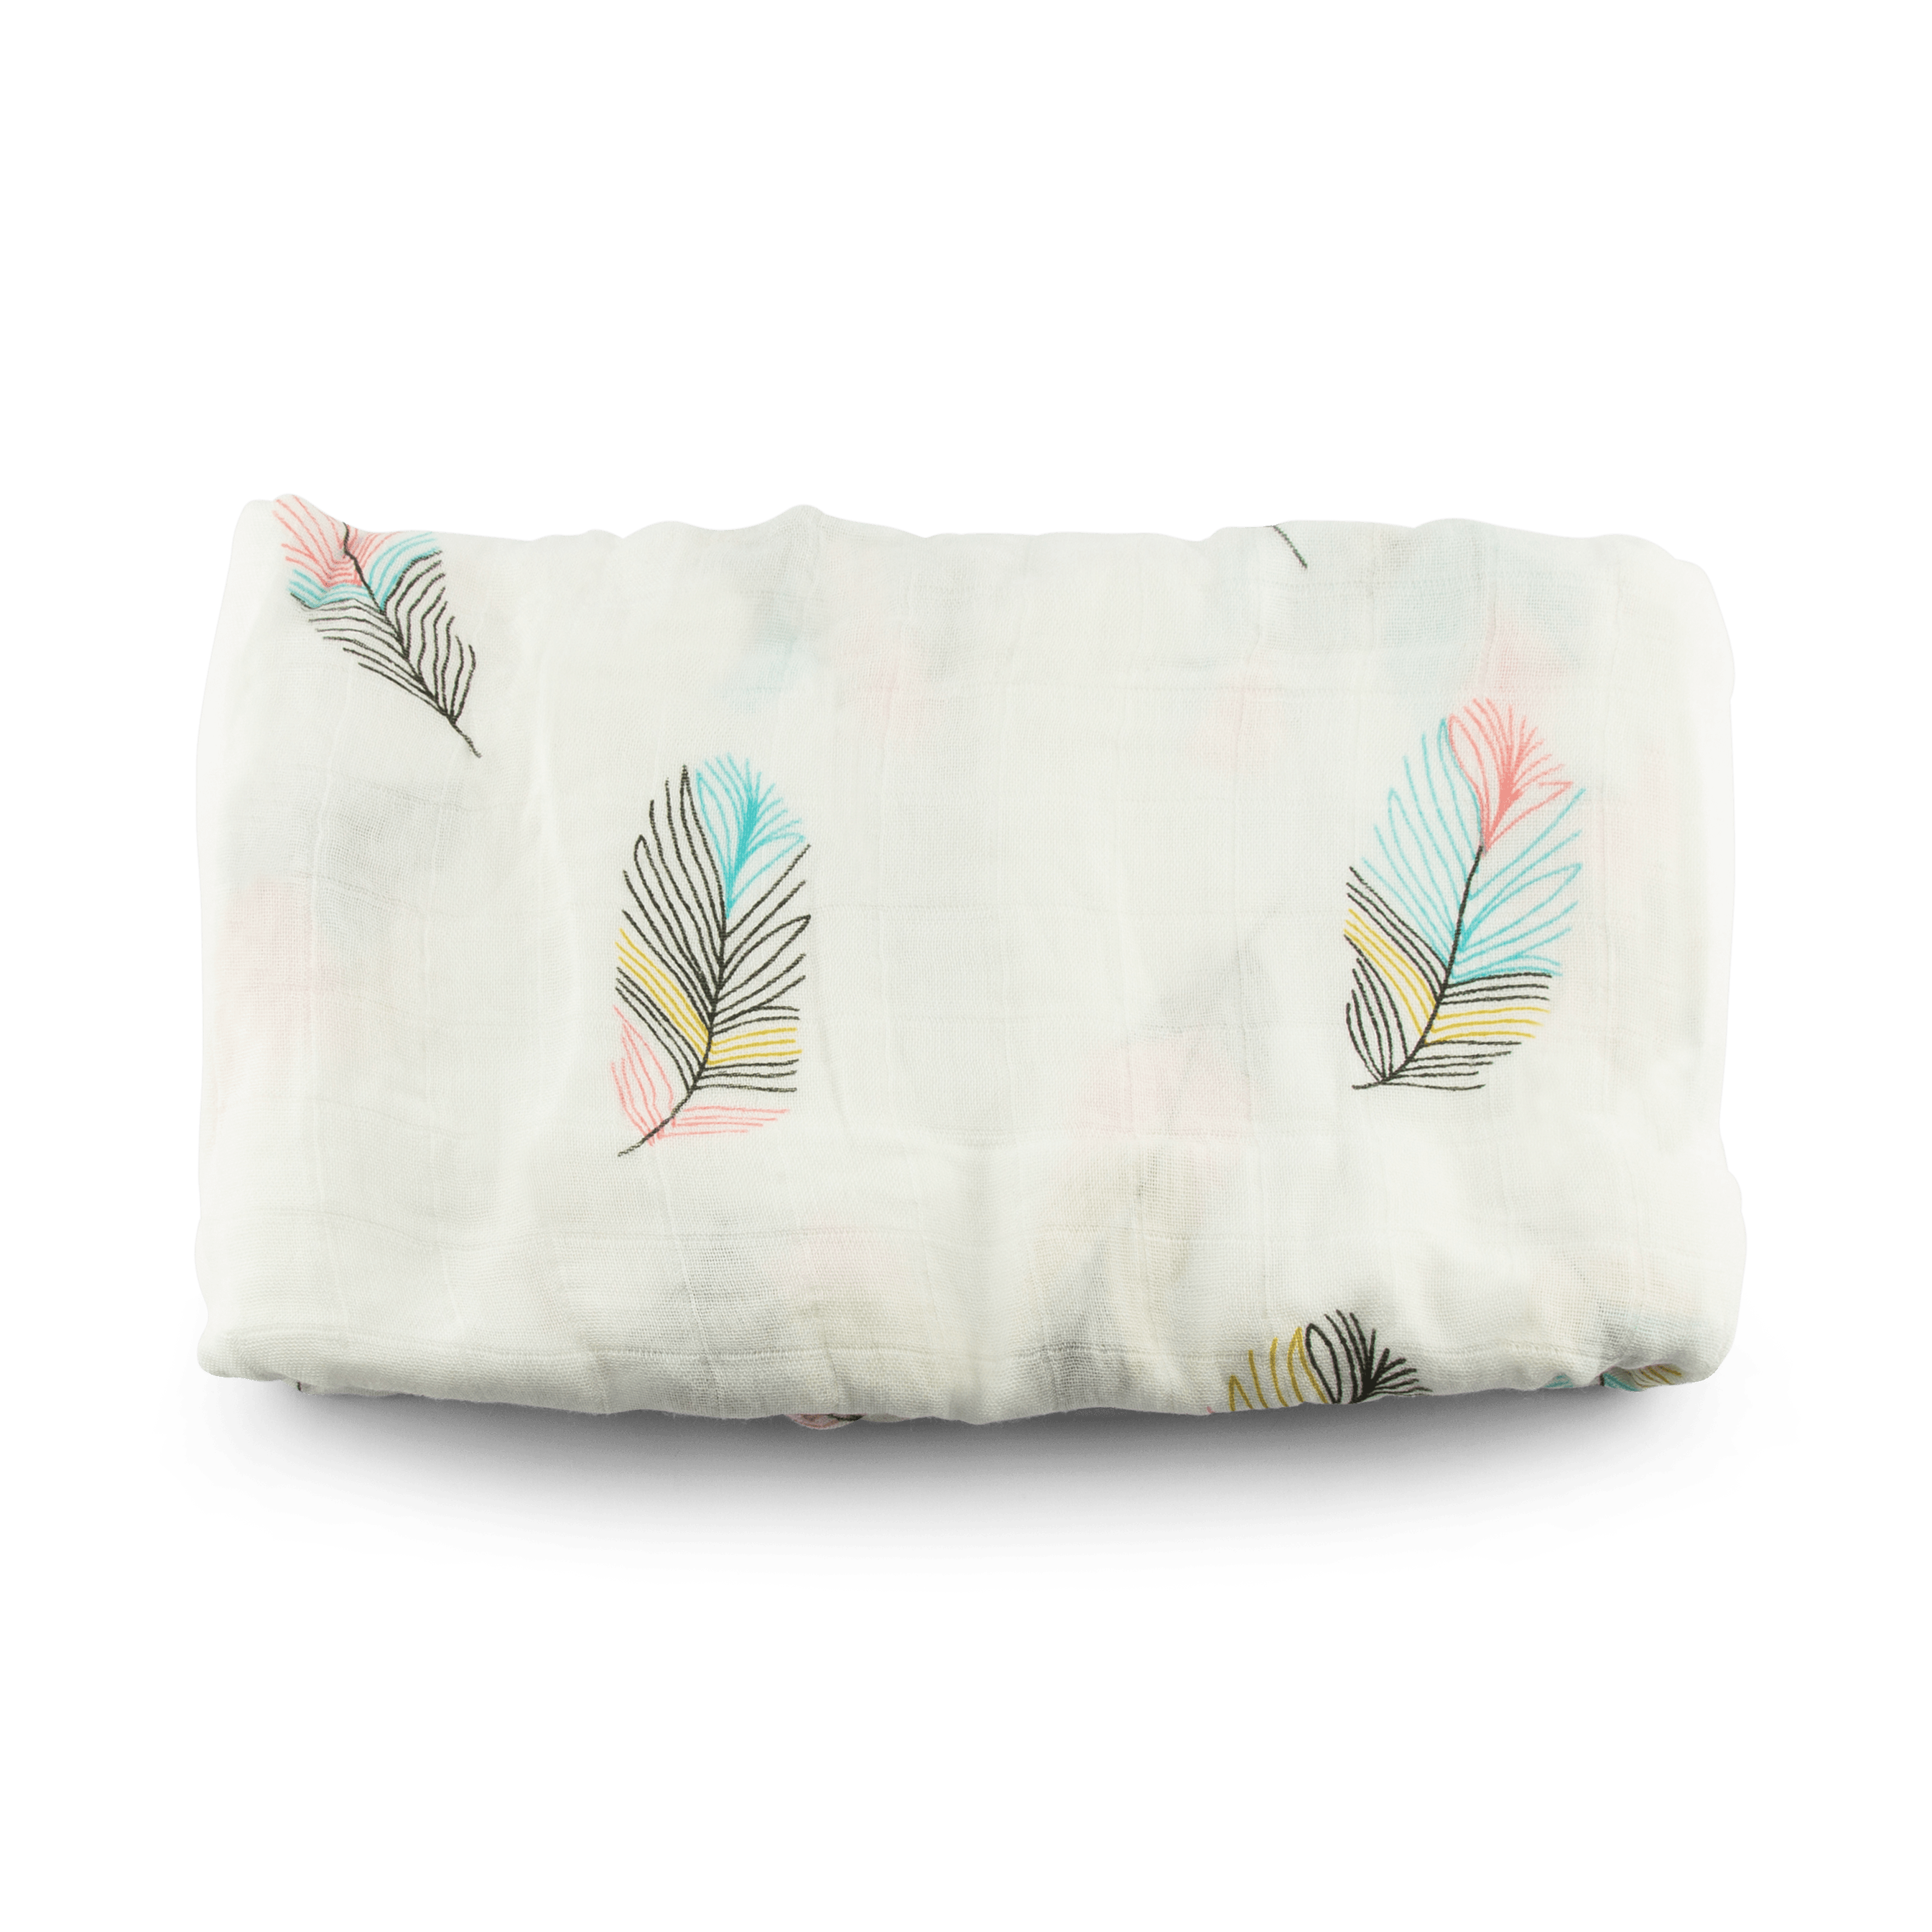 Feathers Large Muslin Swaddle Blanket for Infants